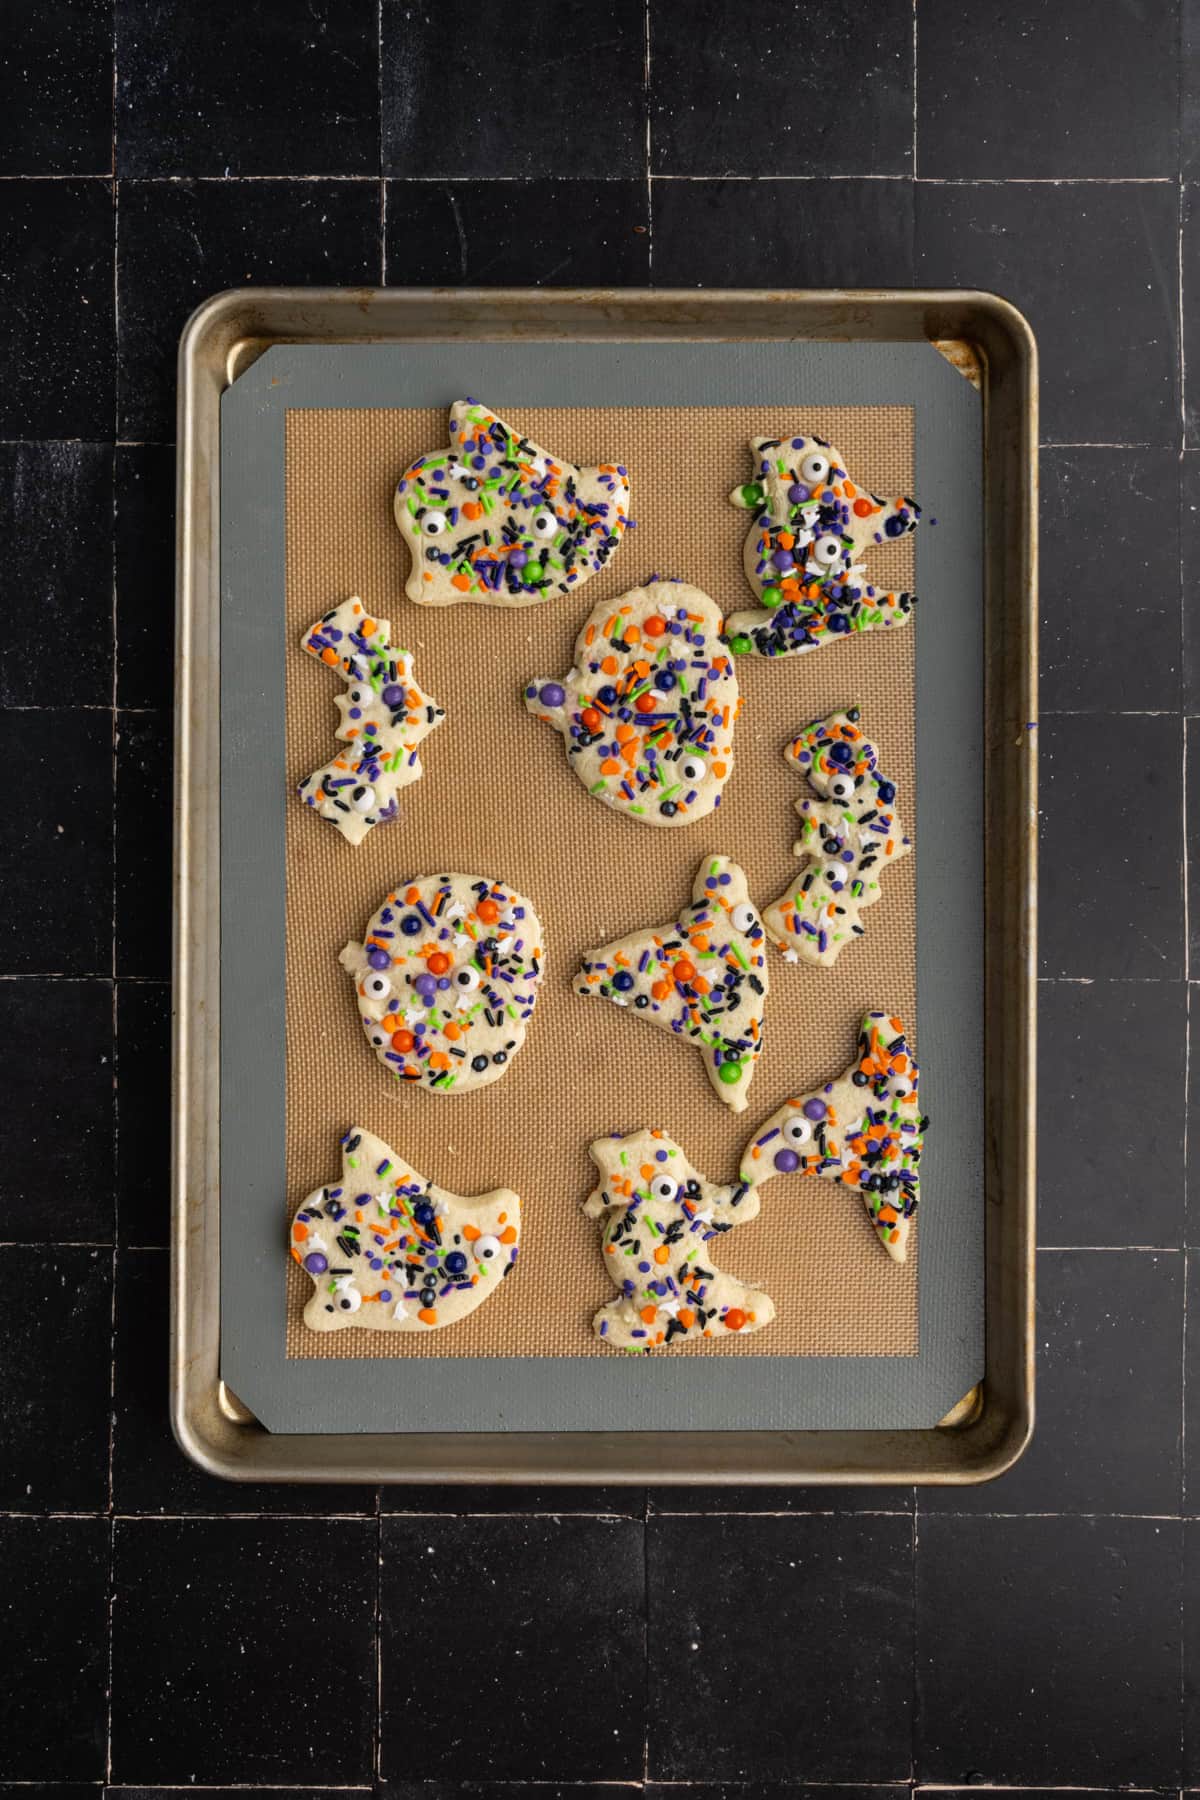 Halloween shaped sugar cut out cookies with sprinkles.